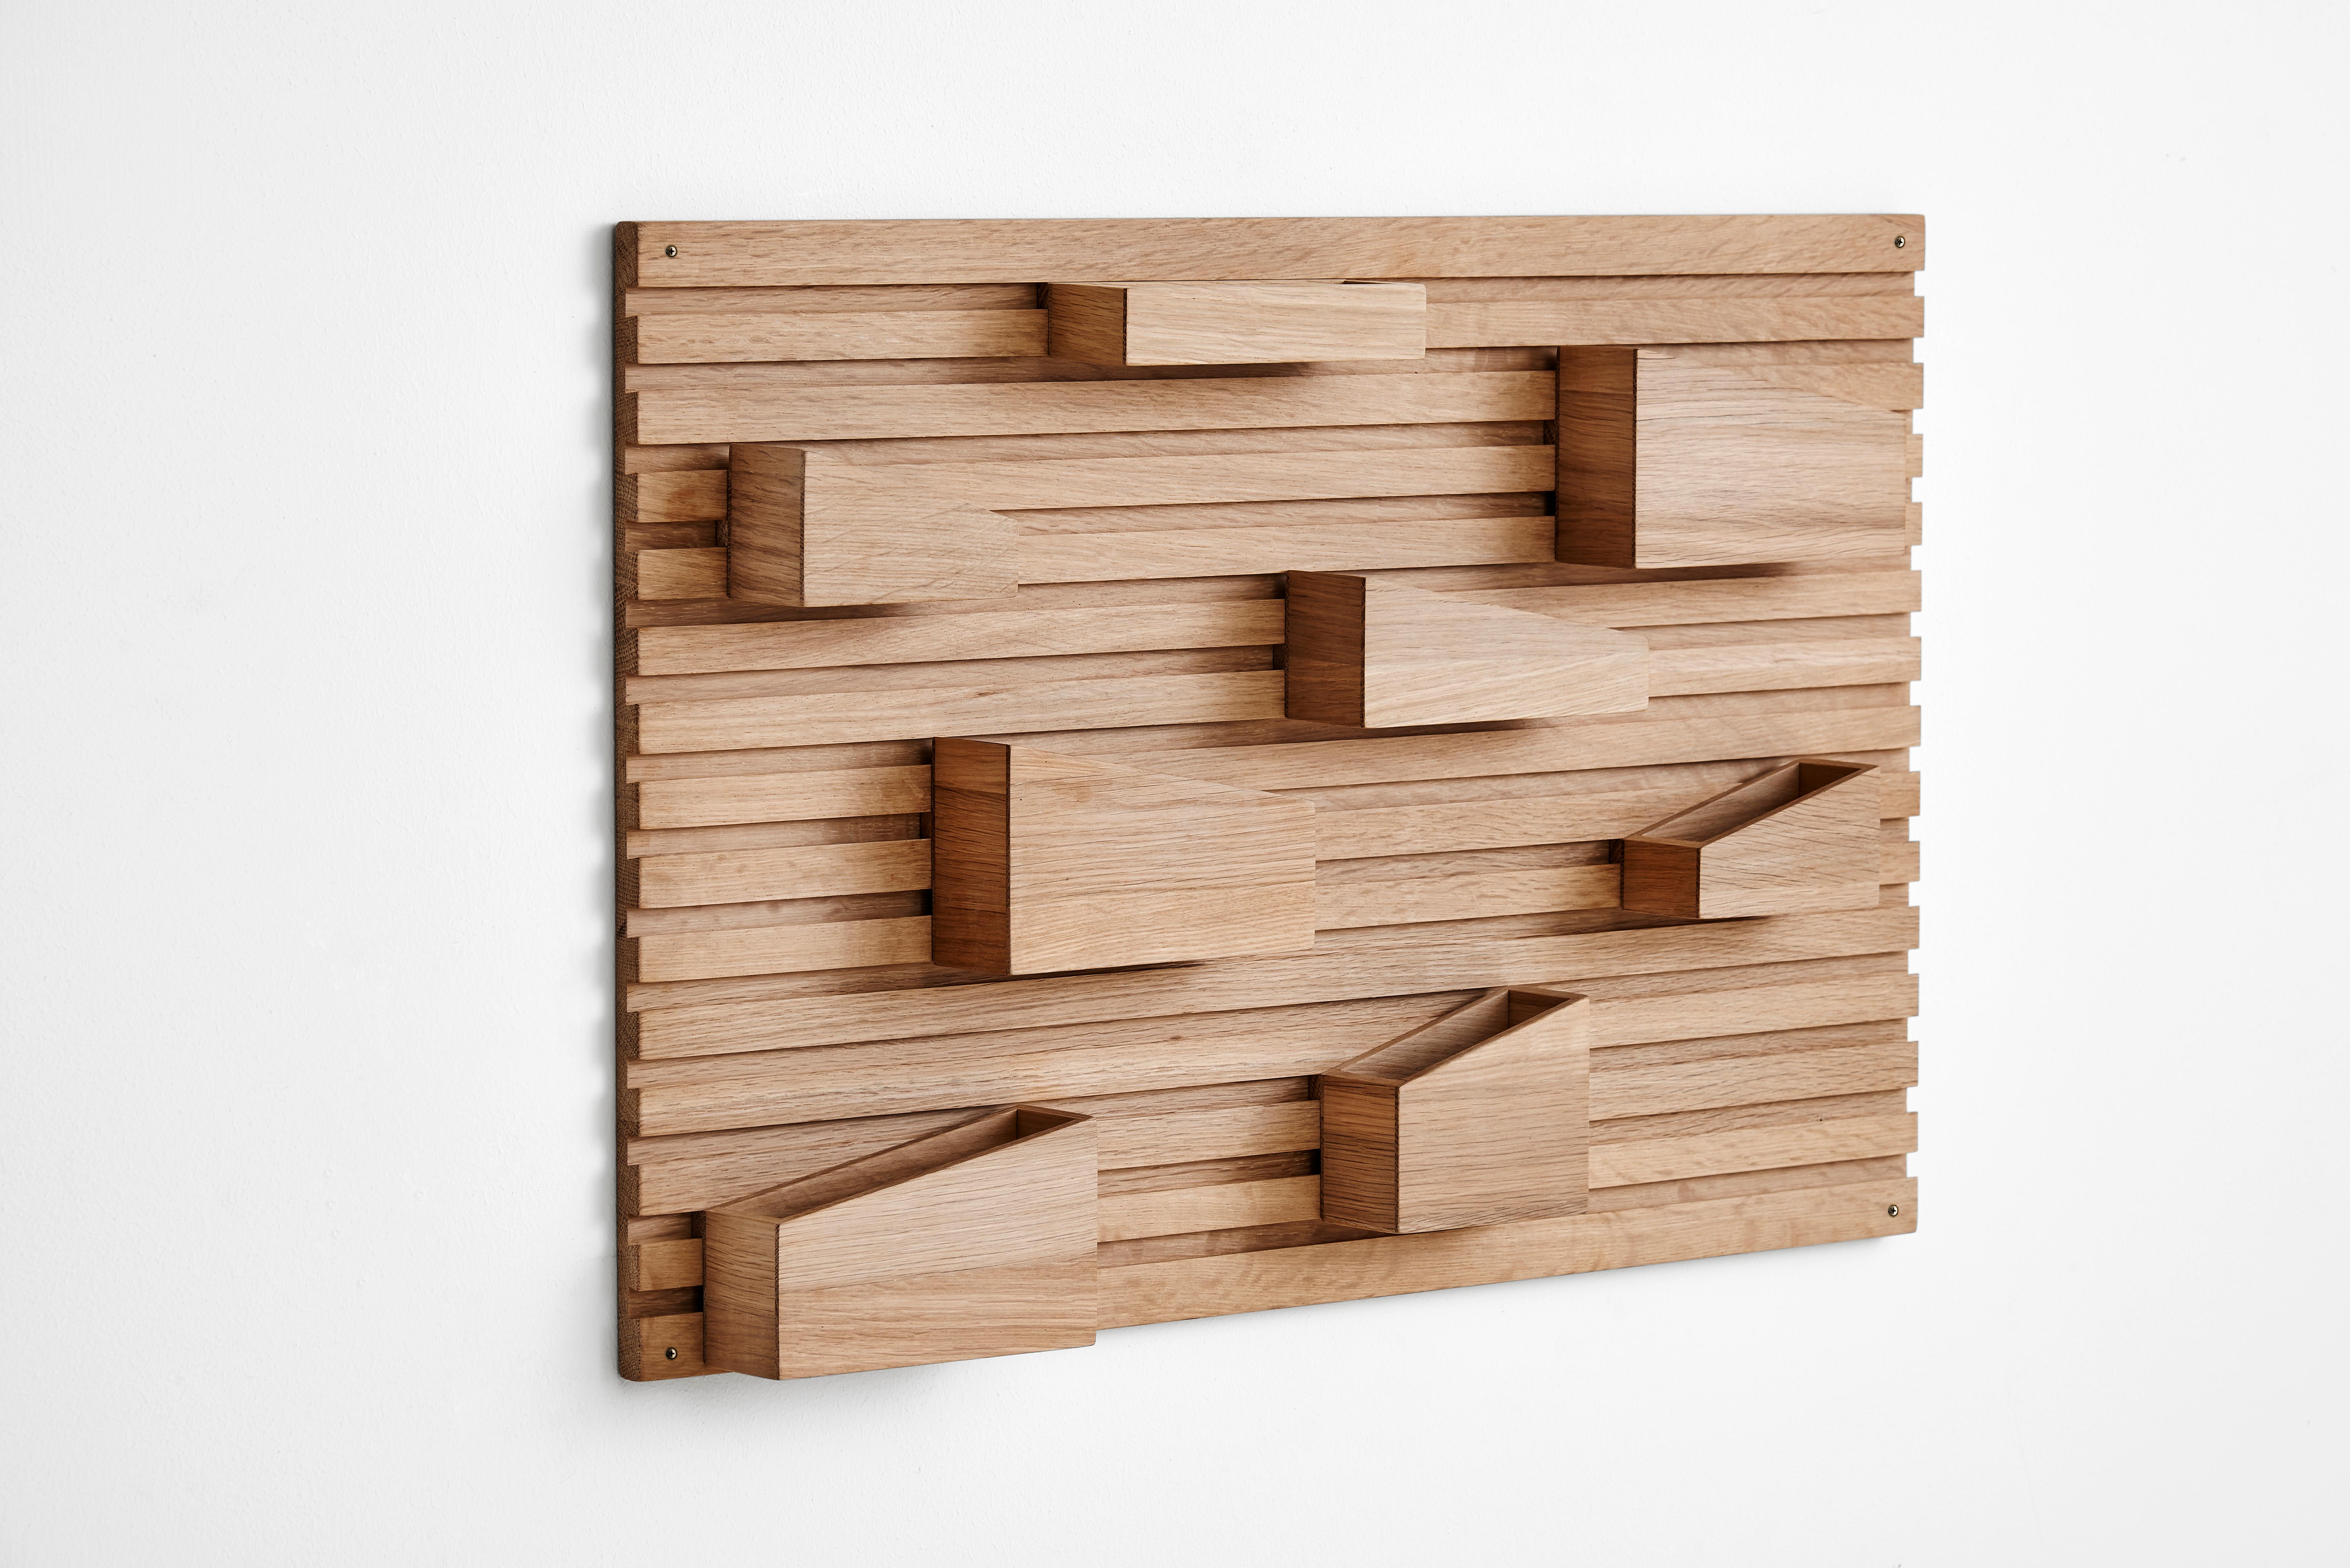 Input organiser by Anne Holm and Sigrid Smetana.
Materials: oak.
Dimensions: D 6.5 x W 66 x H 44 cm.

Input is a flexible organiser with eight movable boxes in different dimensions and shapes. Allowing you to create the exact expression you want